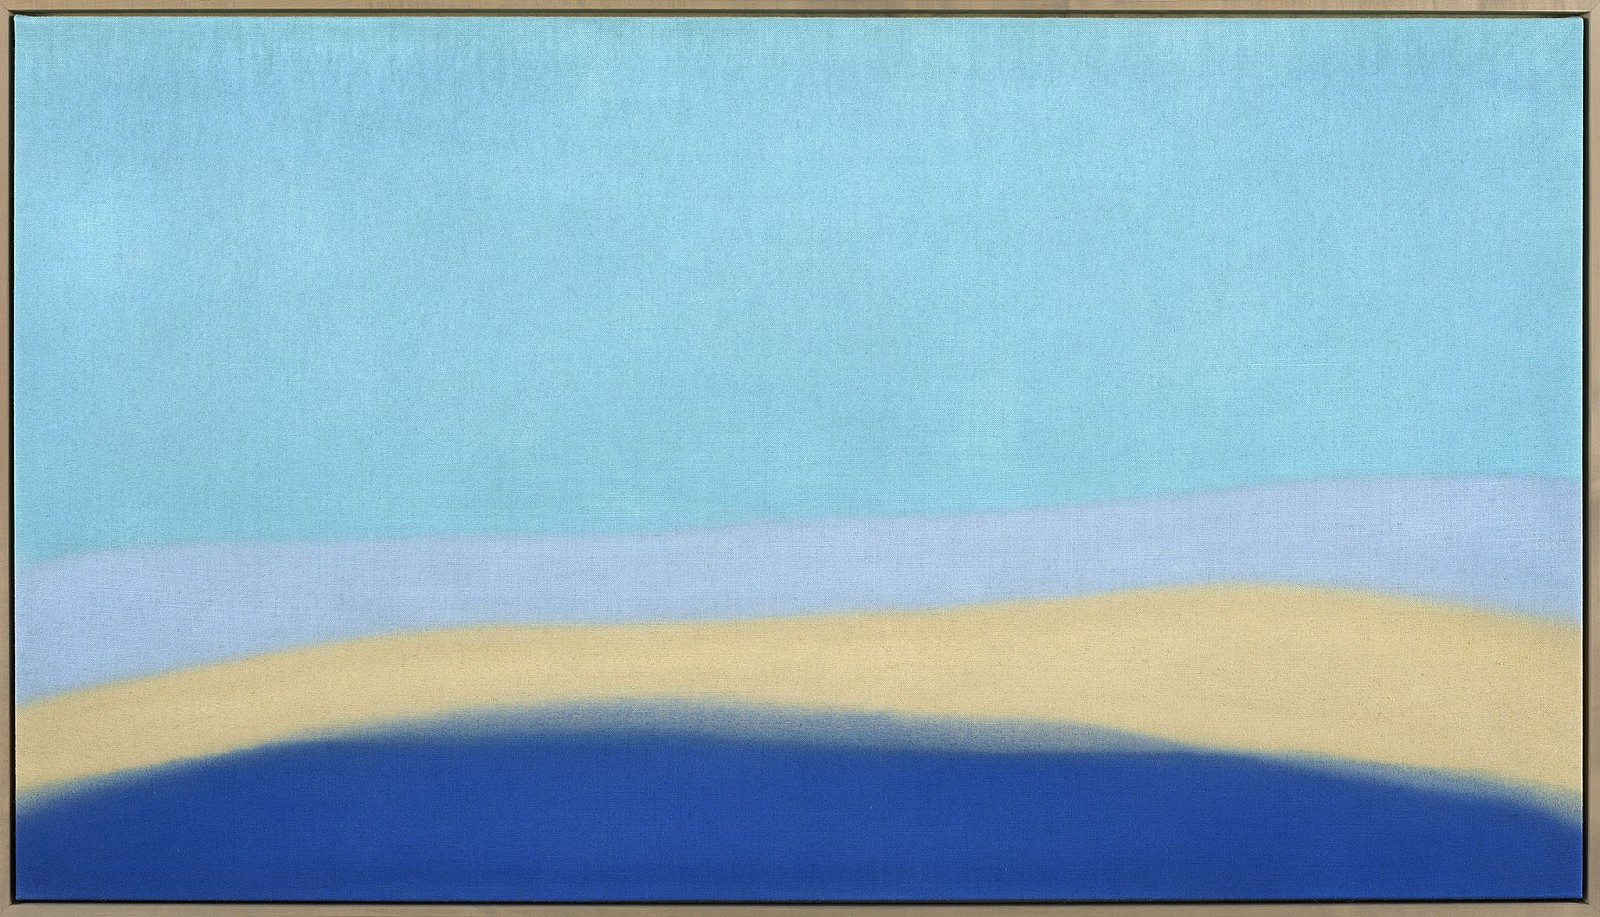 Susan Vecsey, Untitled (Turquoise/Blue), 2018
Oil on linen, 38 x 68 in. (96.5 x 172.7 cm)
VEC-00149